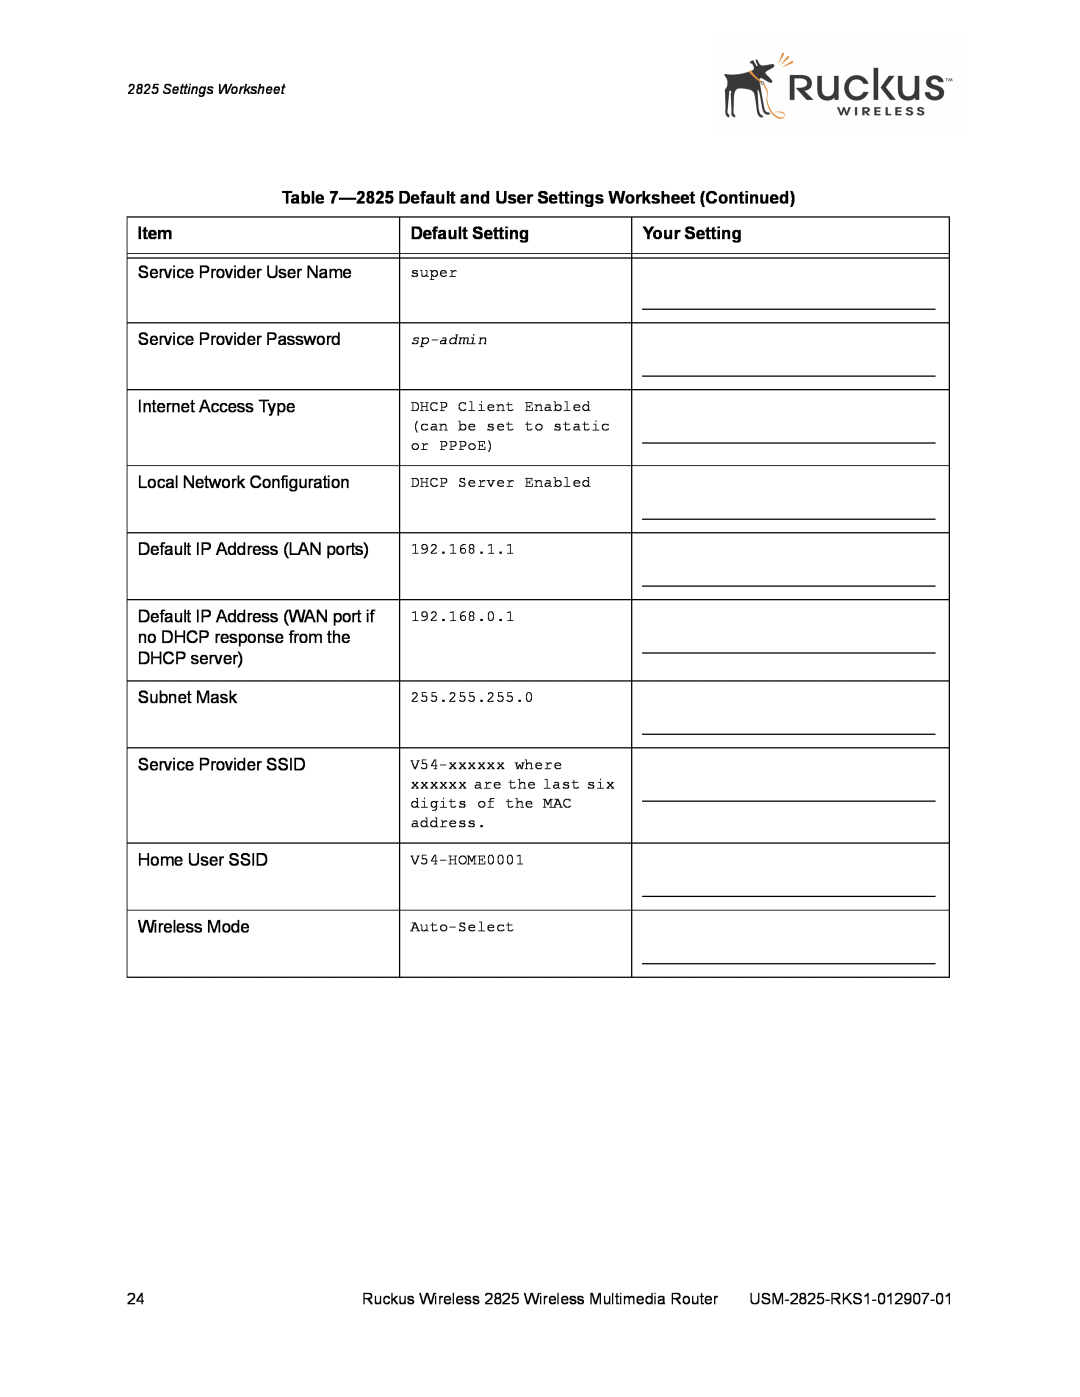 Ruckus Wireless 2111 manual 2825 Default and User Settings Worksheet Continued, Default Setting, Your Setting 